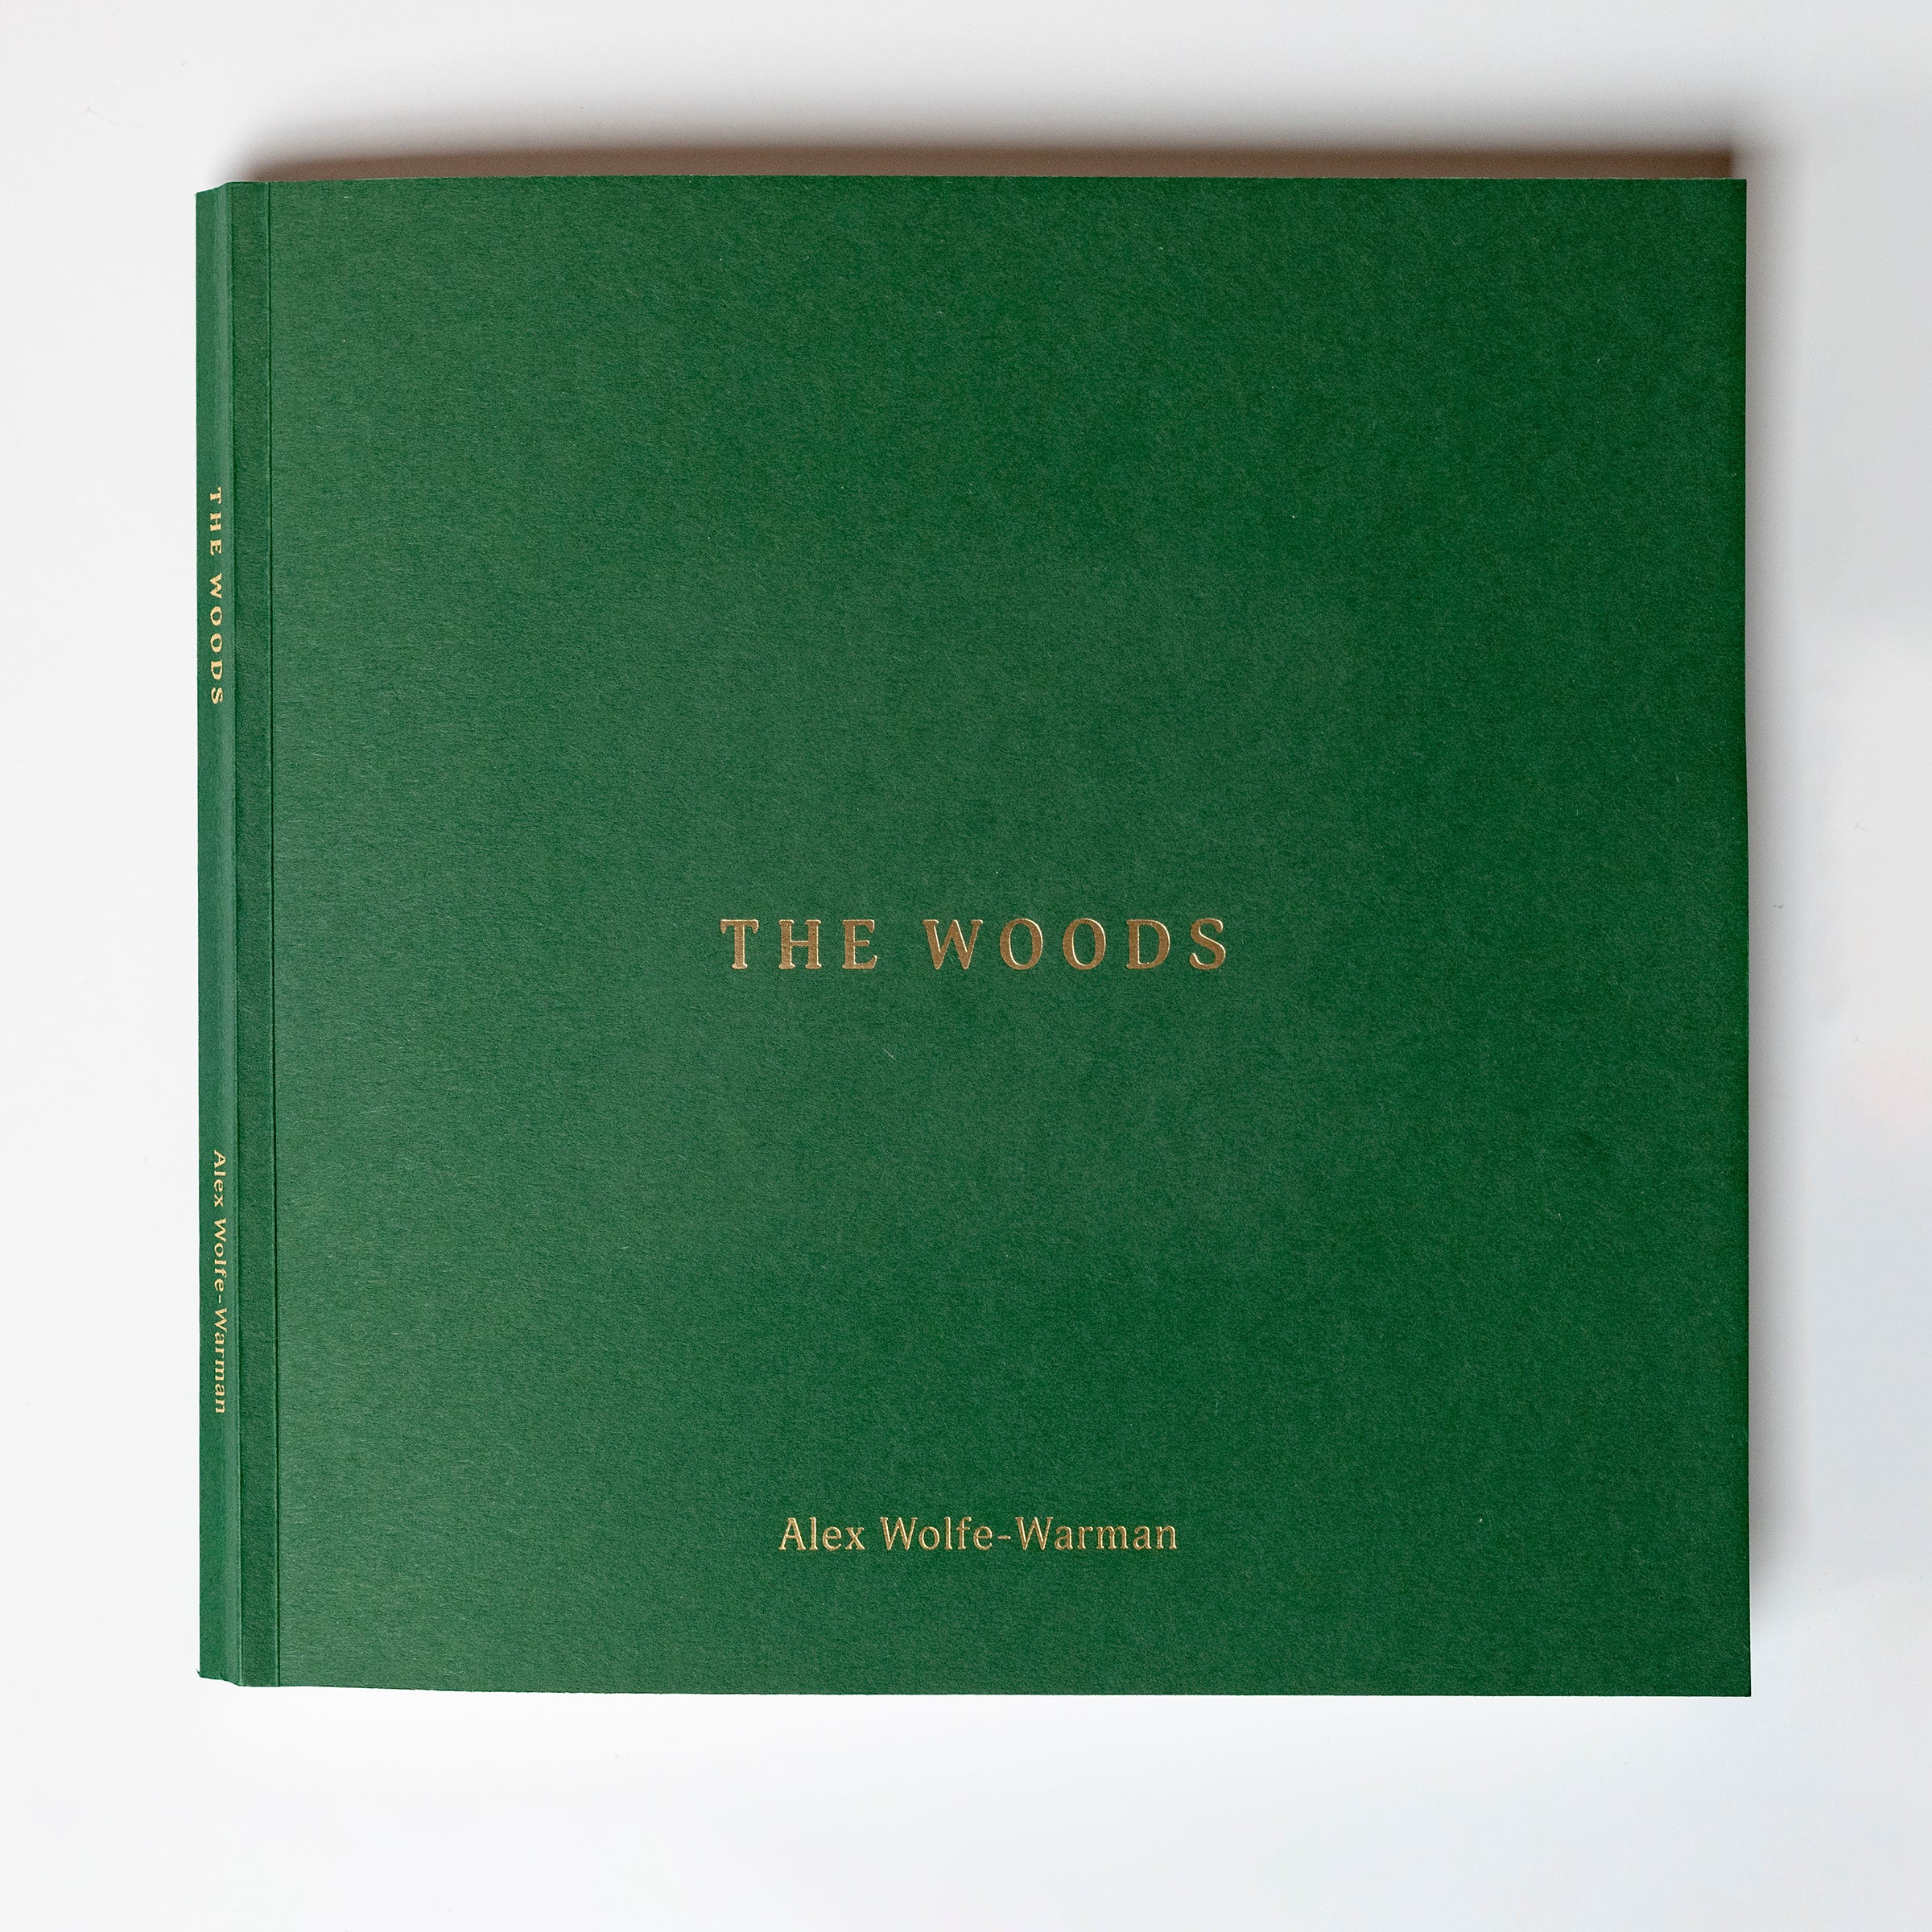 The Woods (signed)